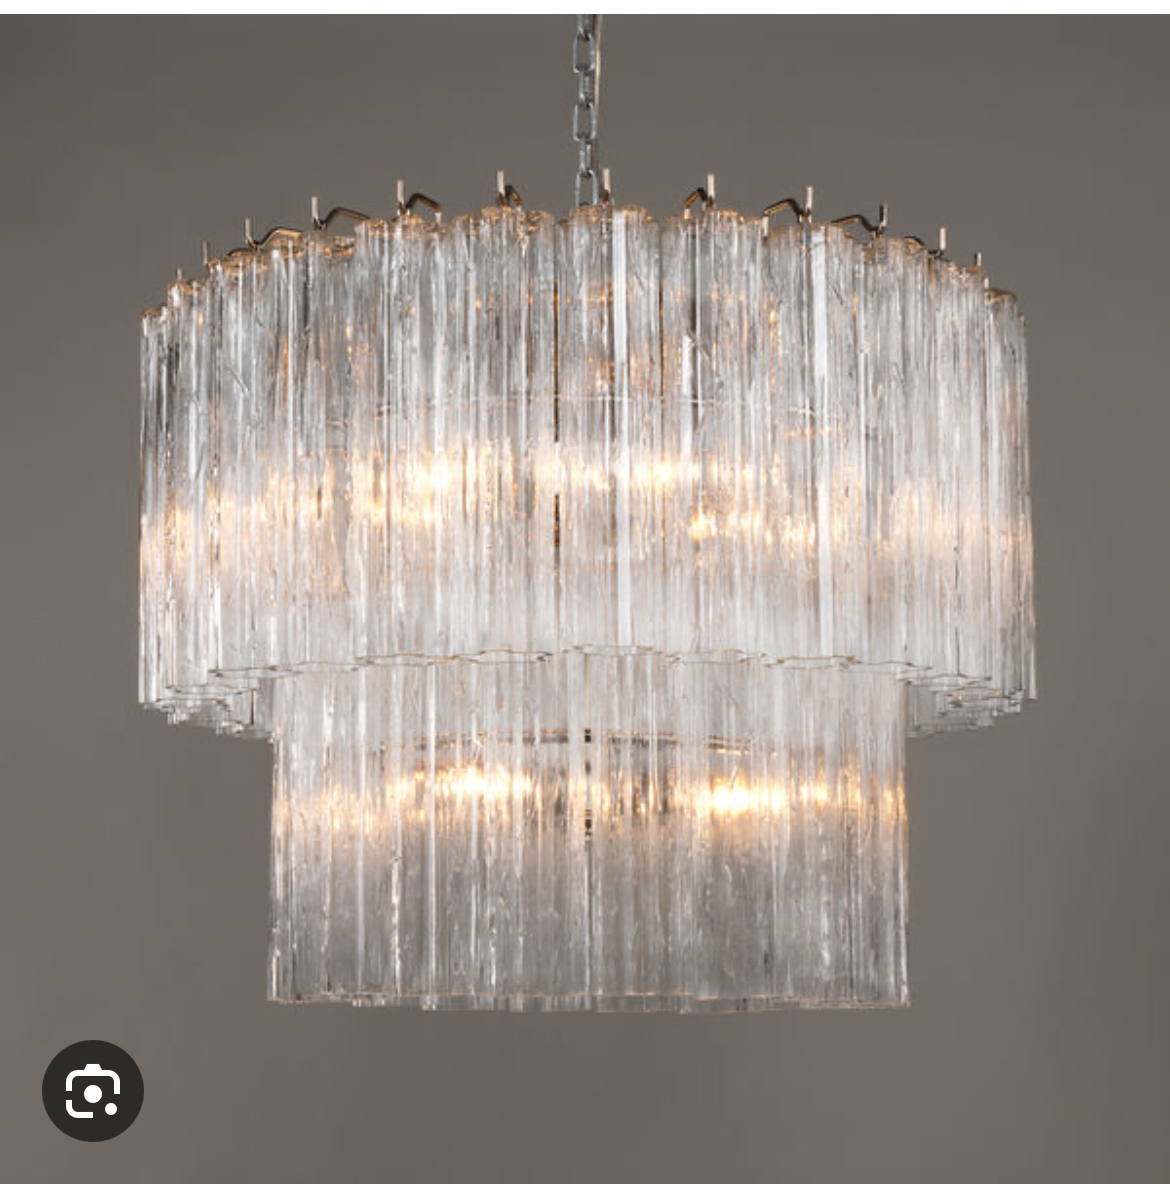 A Lymington chandelier by Vaughan Designs